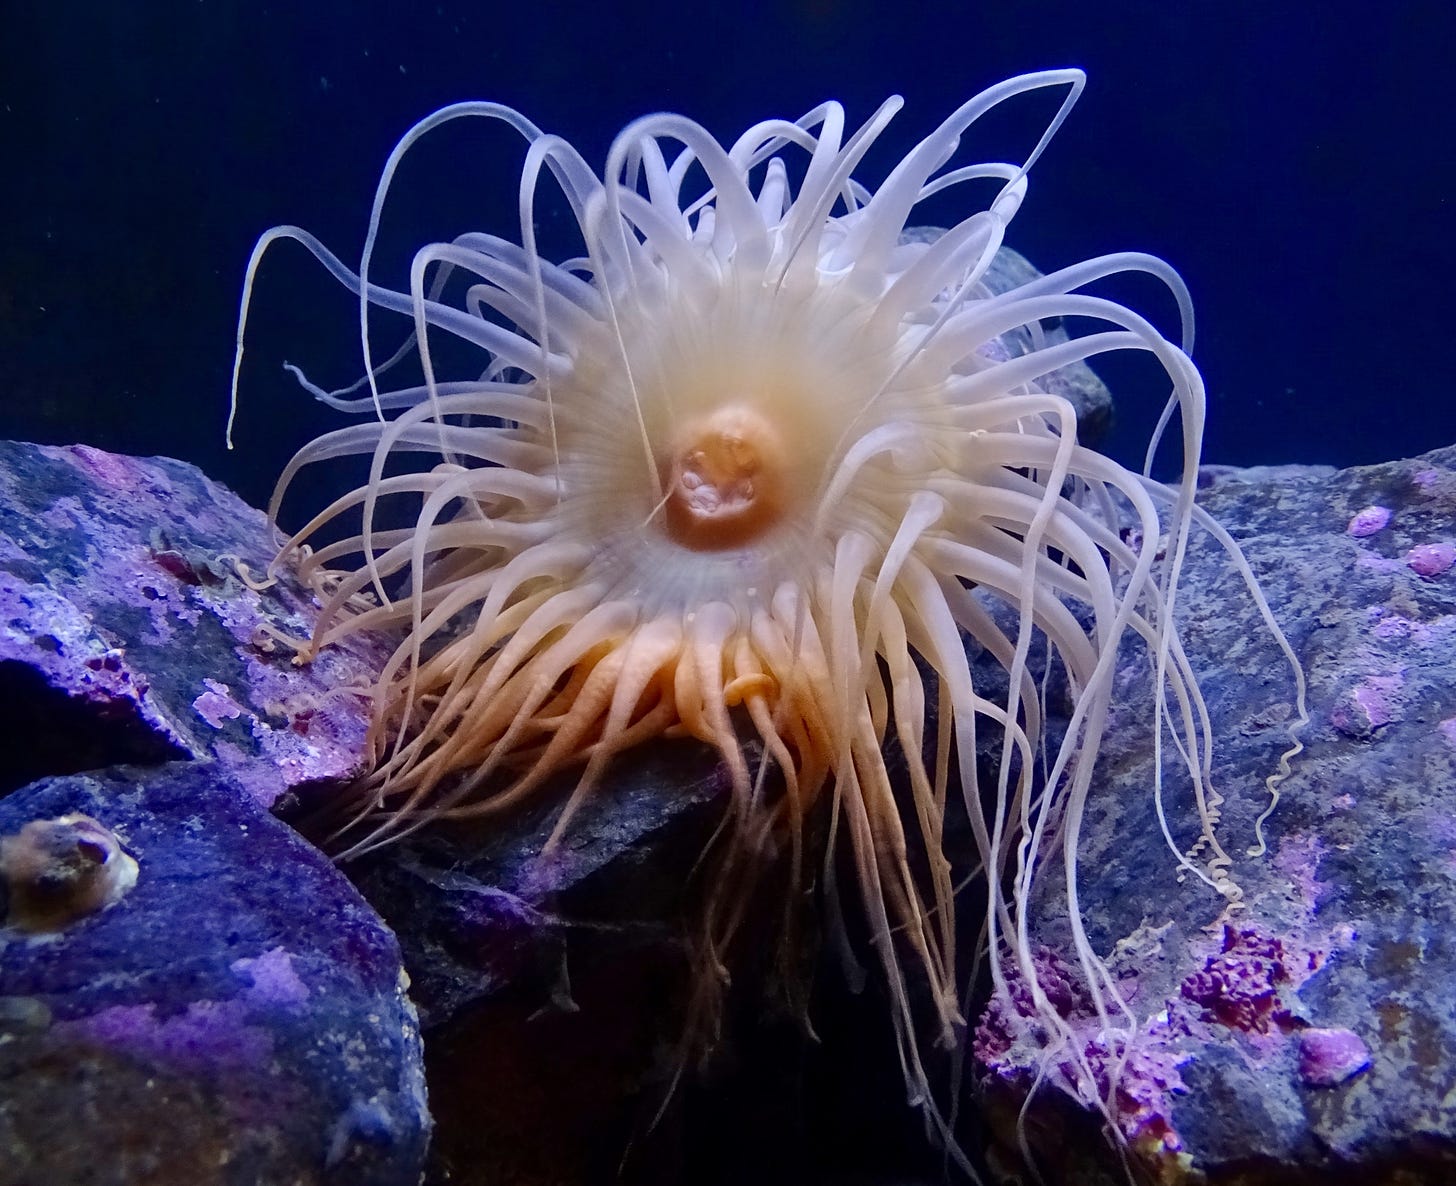 A white and coral many-tentacled sea anemone sits on rocks with purple algae